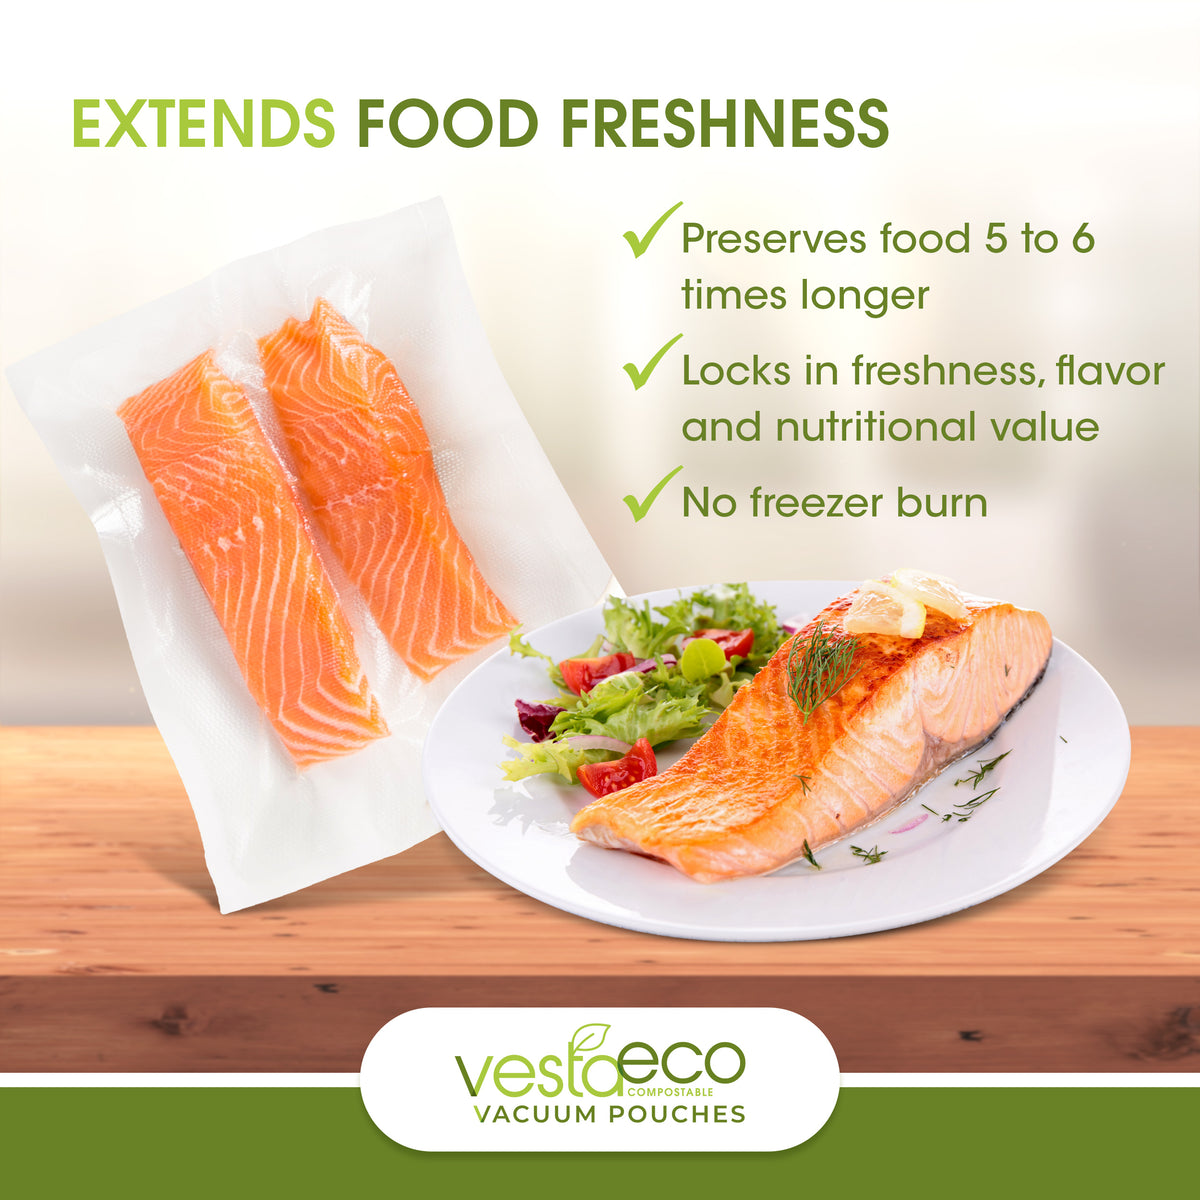 An infographic stating these VestaEco certified commercially compostable flat chamber vacuum seal bags extend freshness and prevent freezer burn.